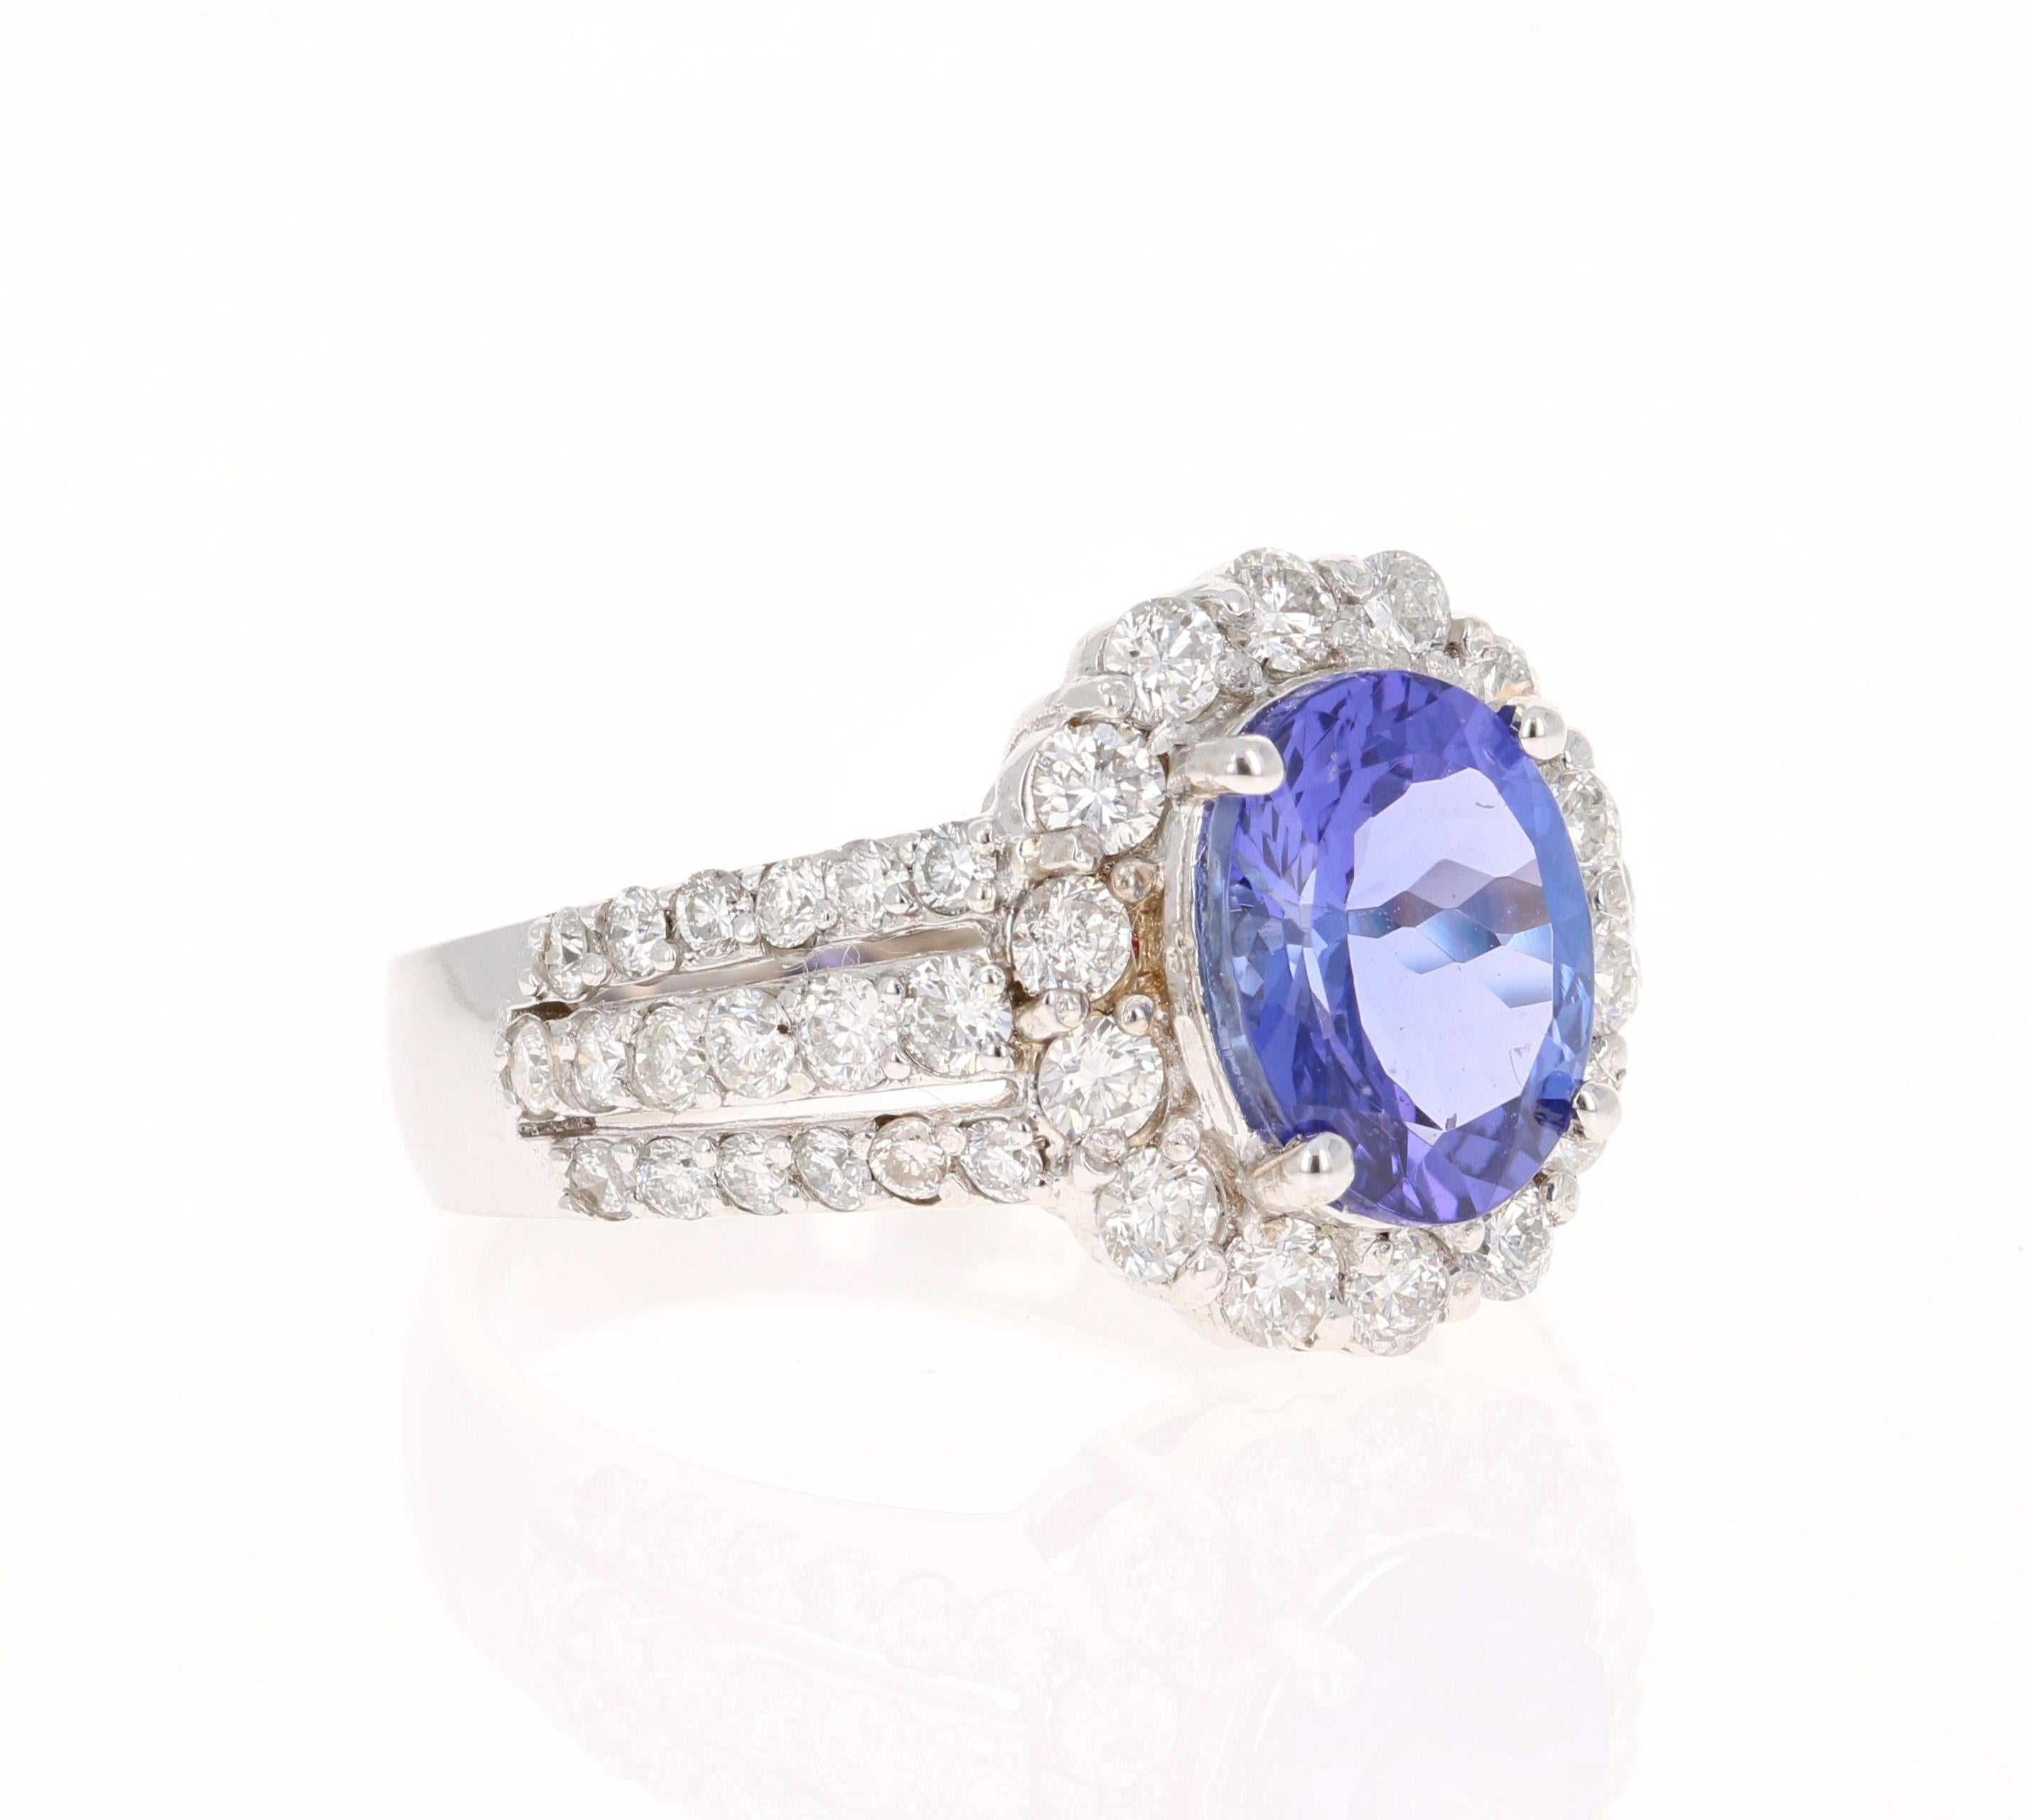 This beautiful ring has a vivid 2.74 Carat Oval Cut Tanzanite. The Tanzanite is surrounded by 50 Round Cut Diamonds that weigh 2.74 Carats. (Clarity: SI, Color: F)  The total carat weight of the ring is 5.48 Carats.  

The ring is made in 18K White